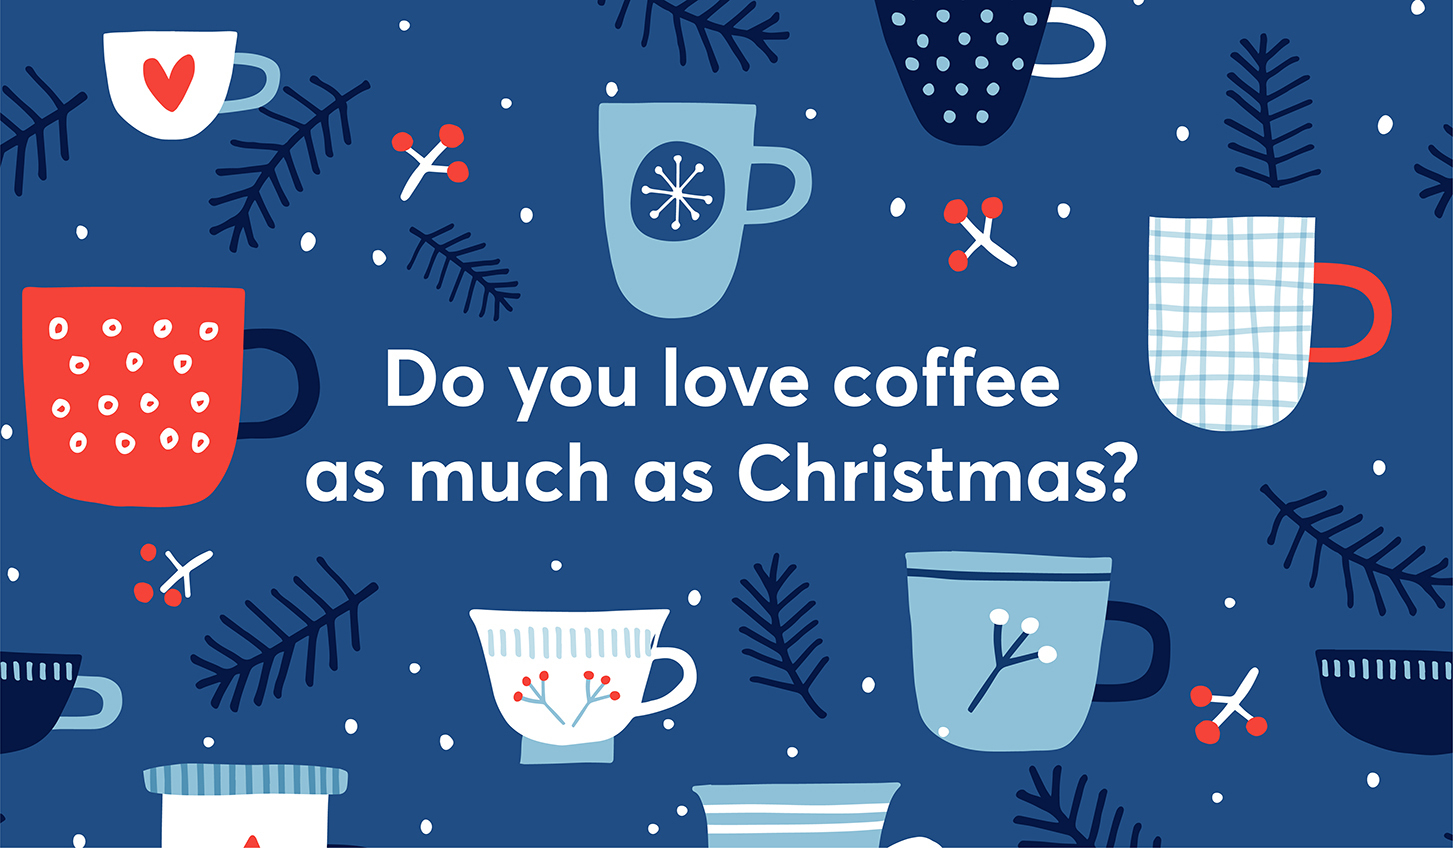 Do you love coffee as much as Christmas